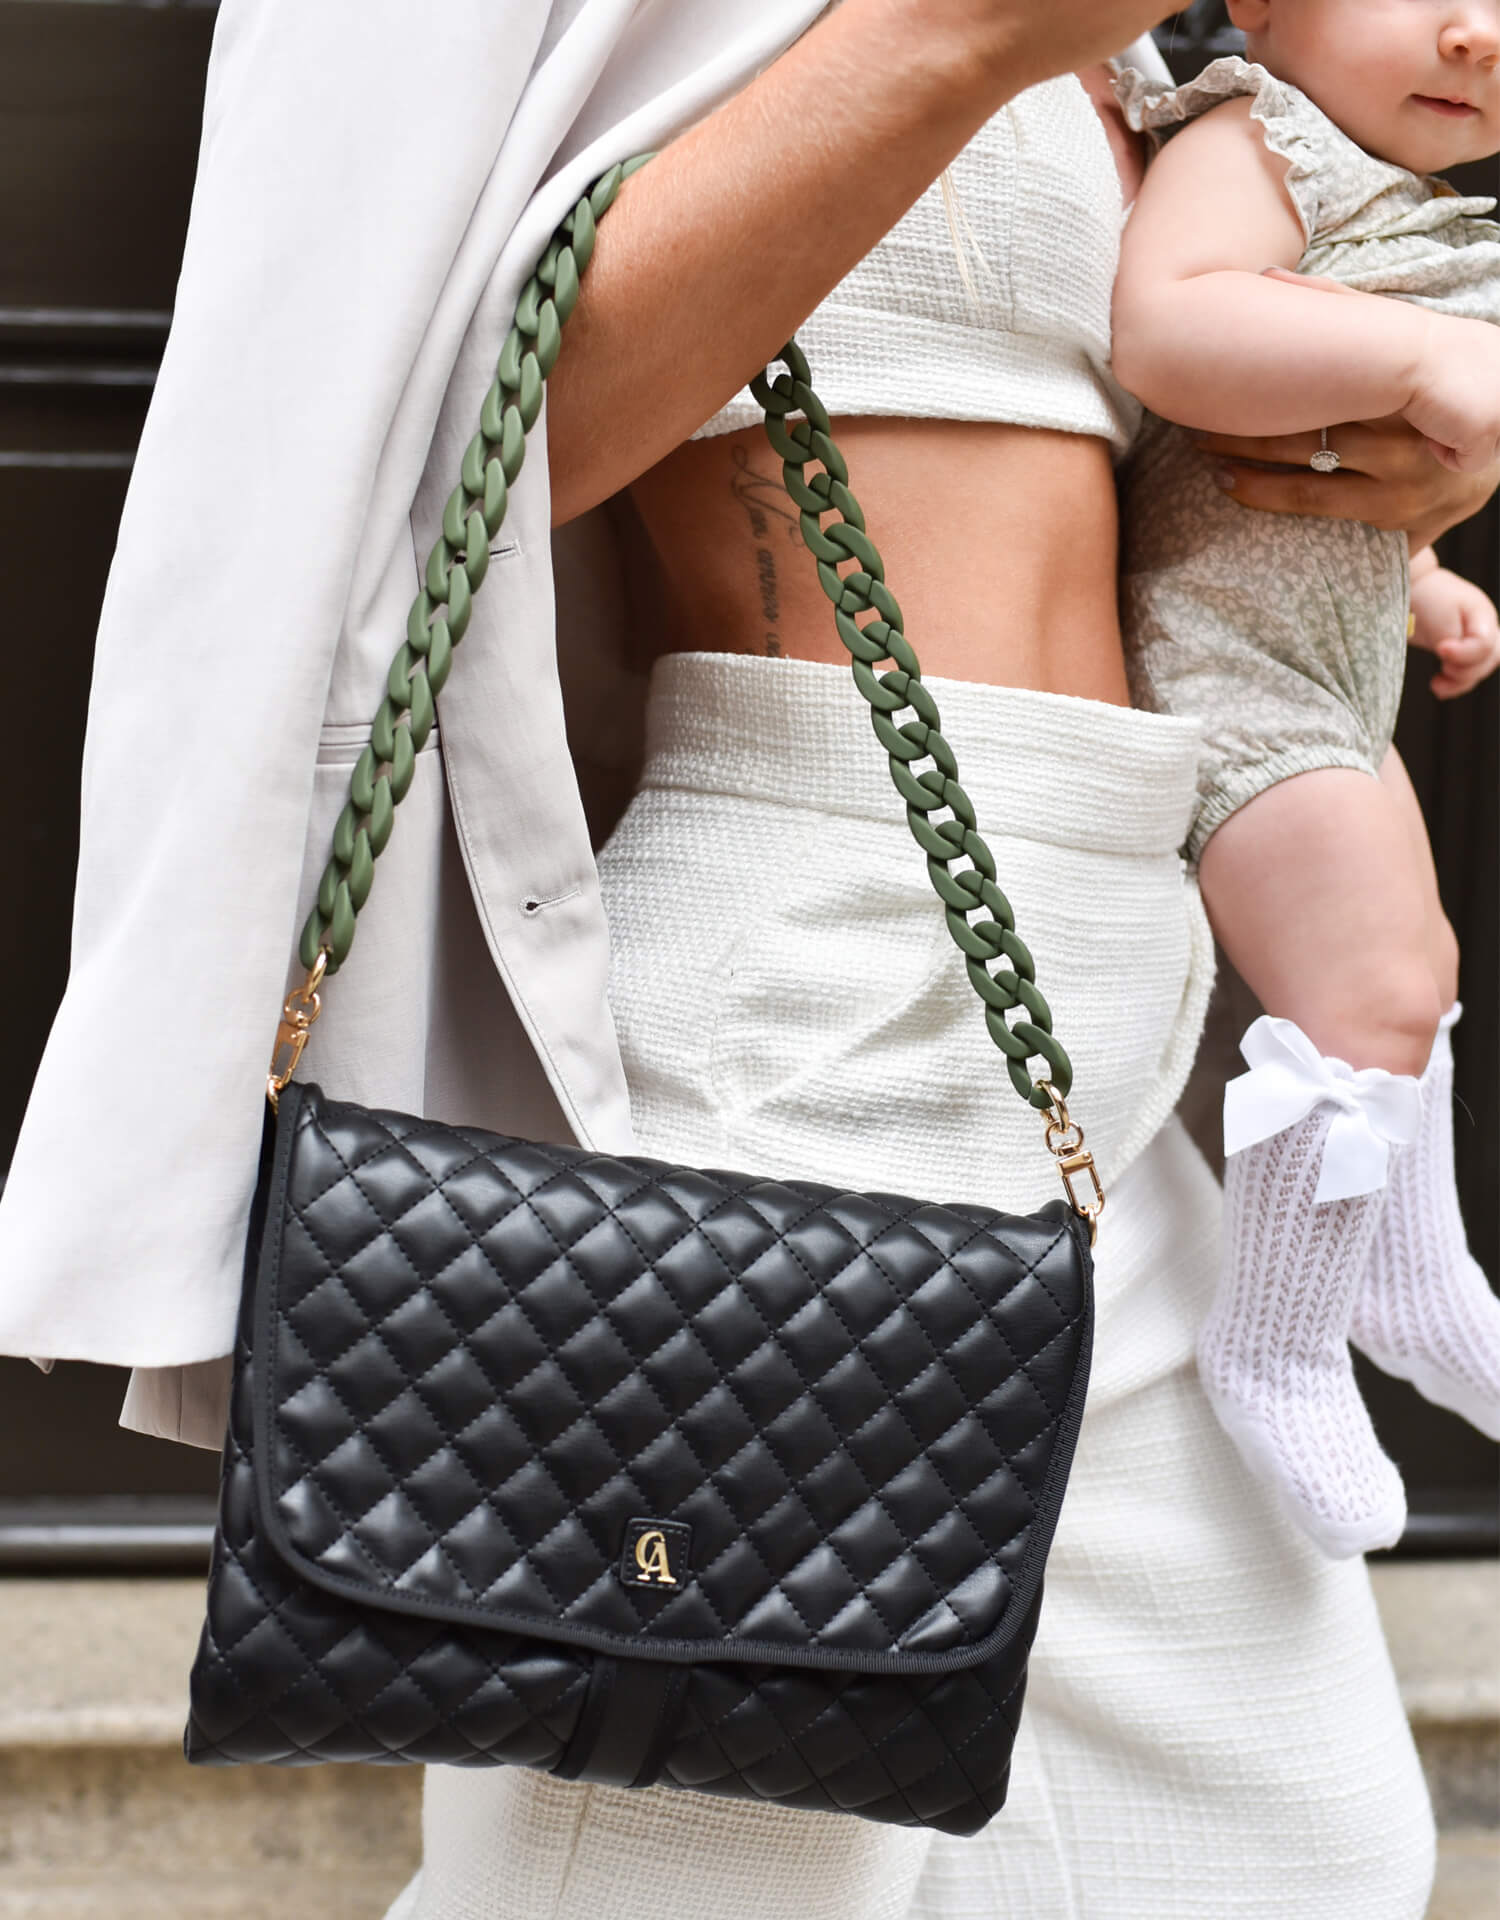 professional mom carrying a baby and a stylish diaper bag in her arm